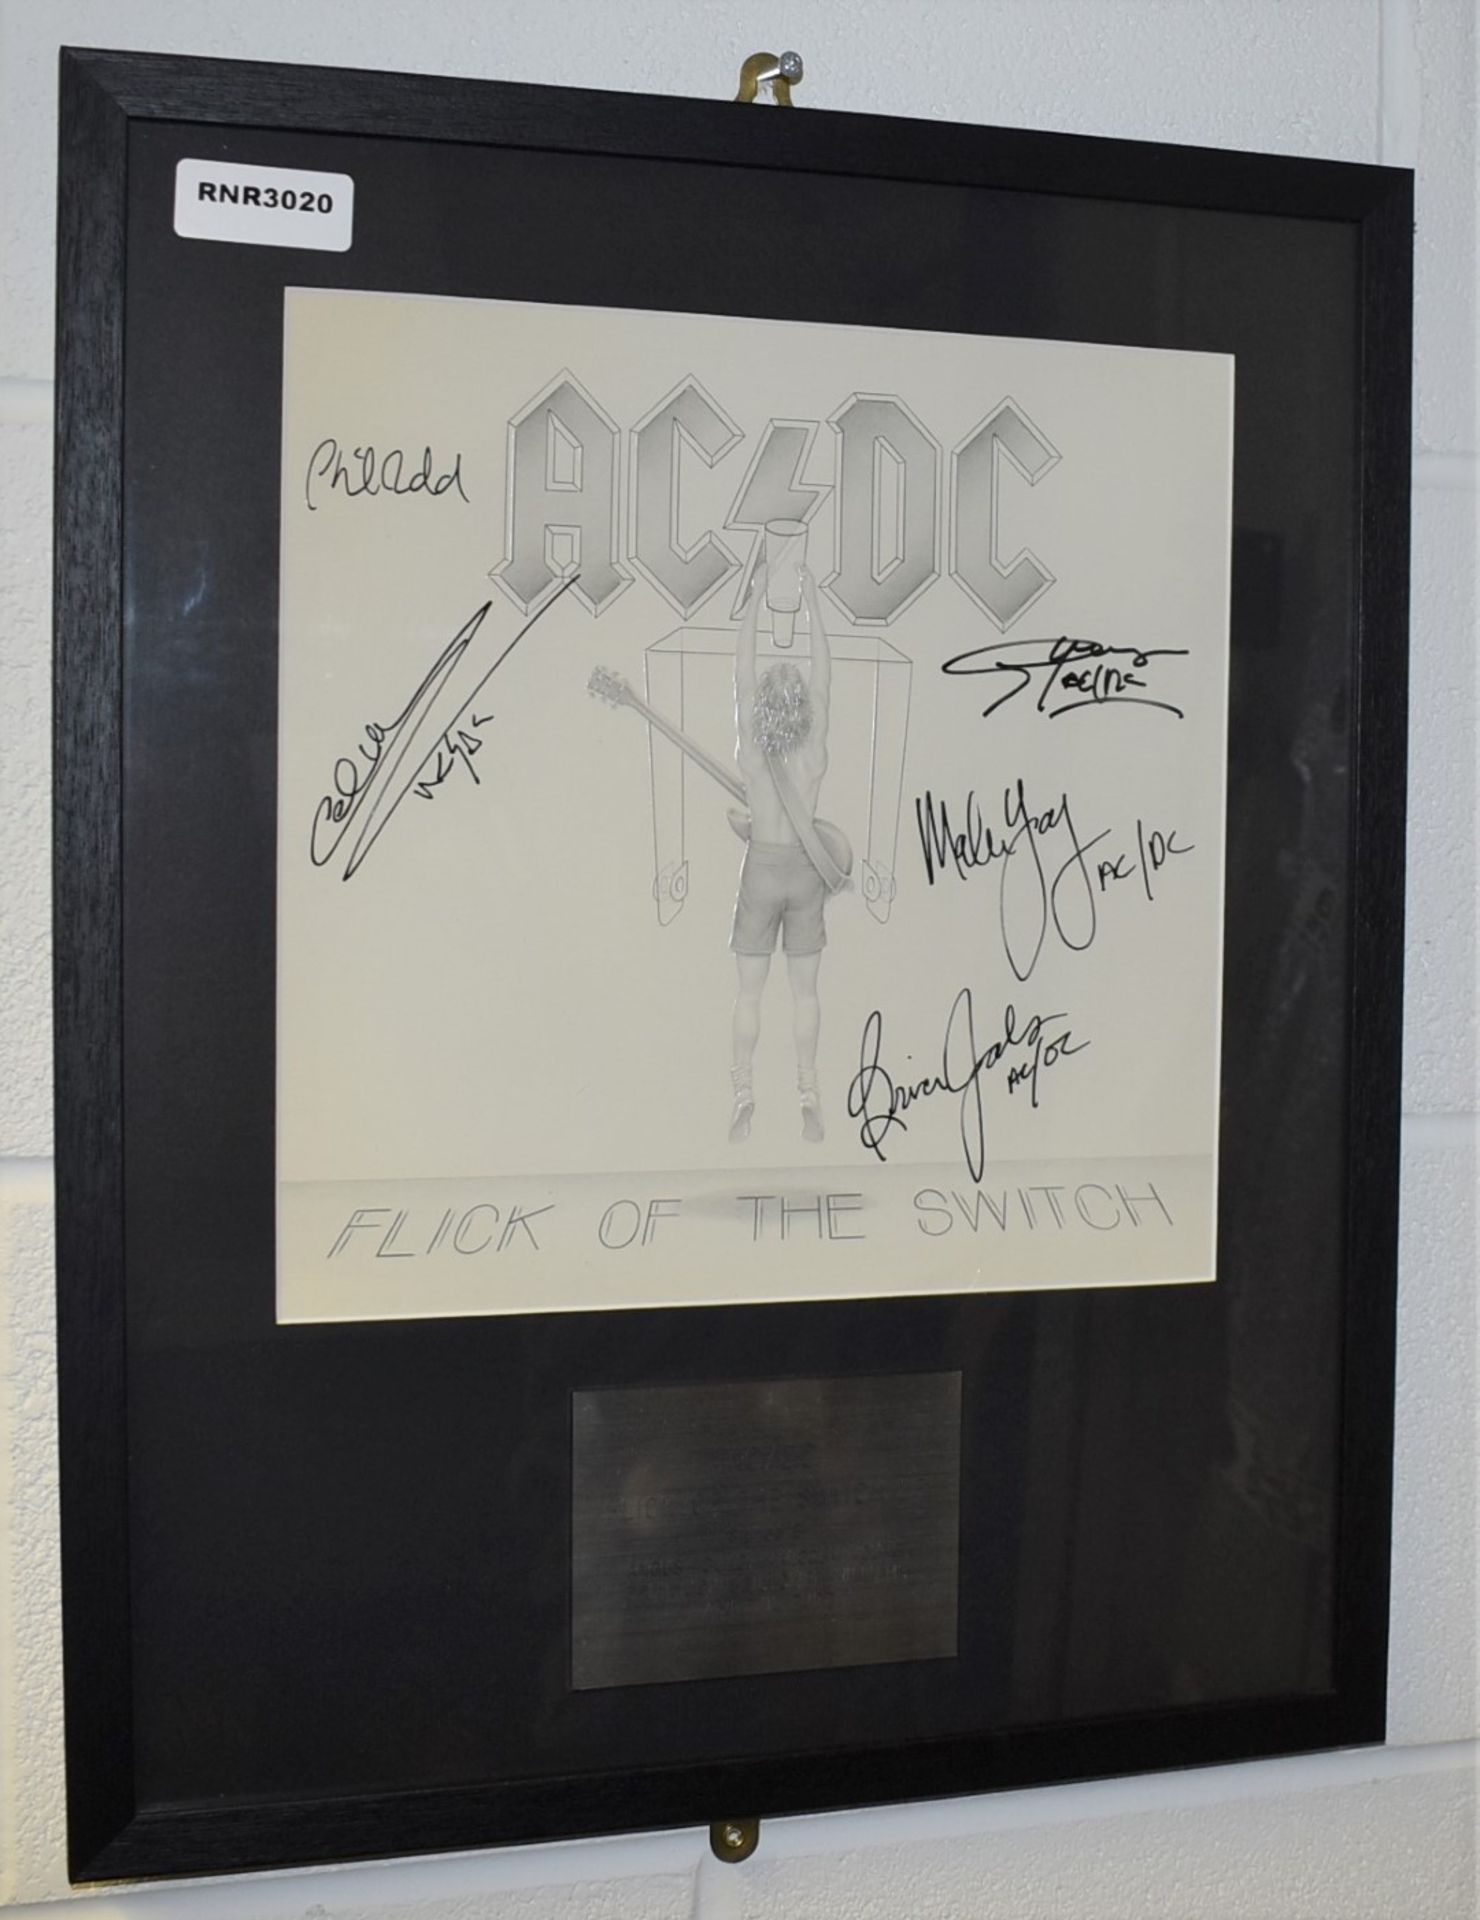 1 x Authentic AC/DC Autographs With COA - Flick of The Switch Album Cover Signed By Dave Evans,